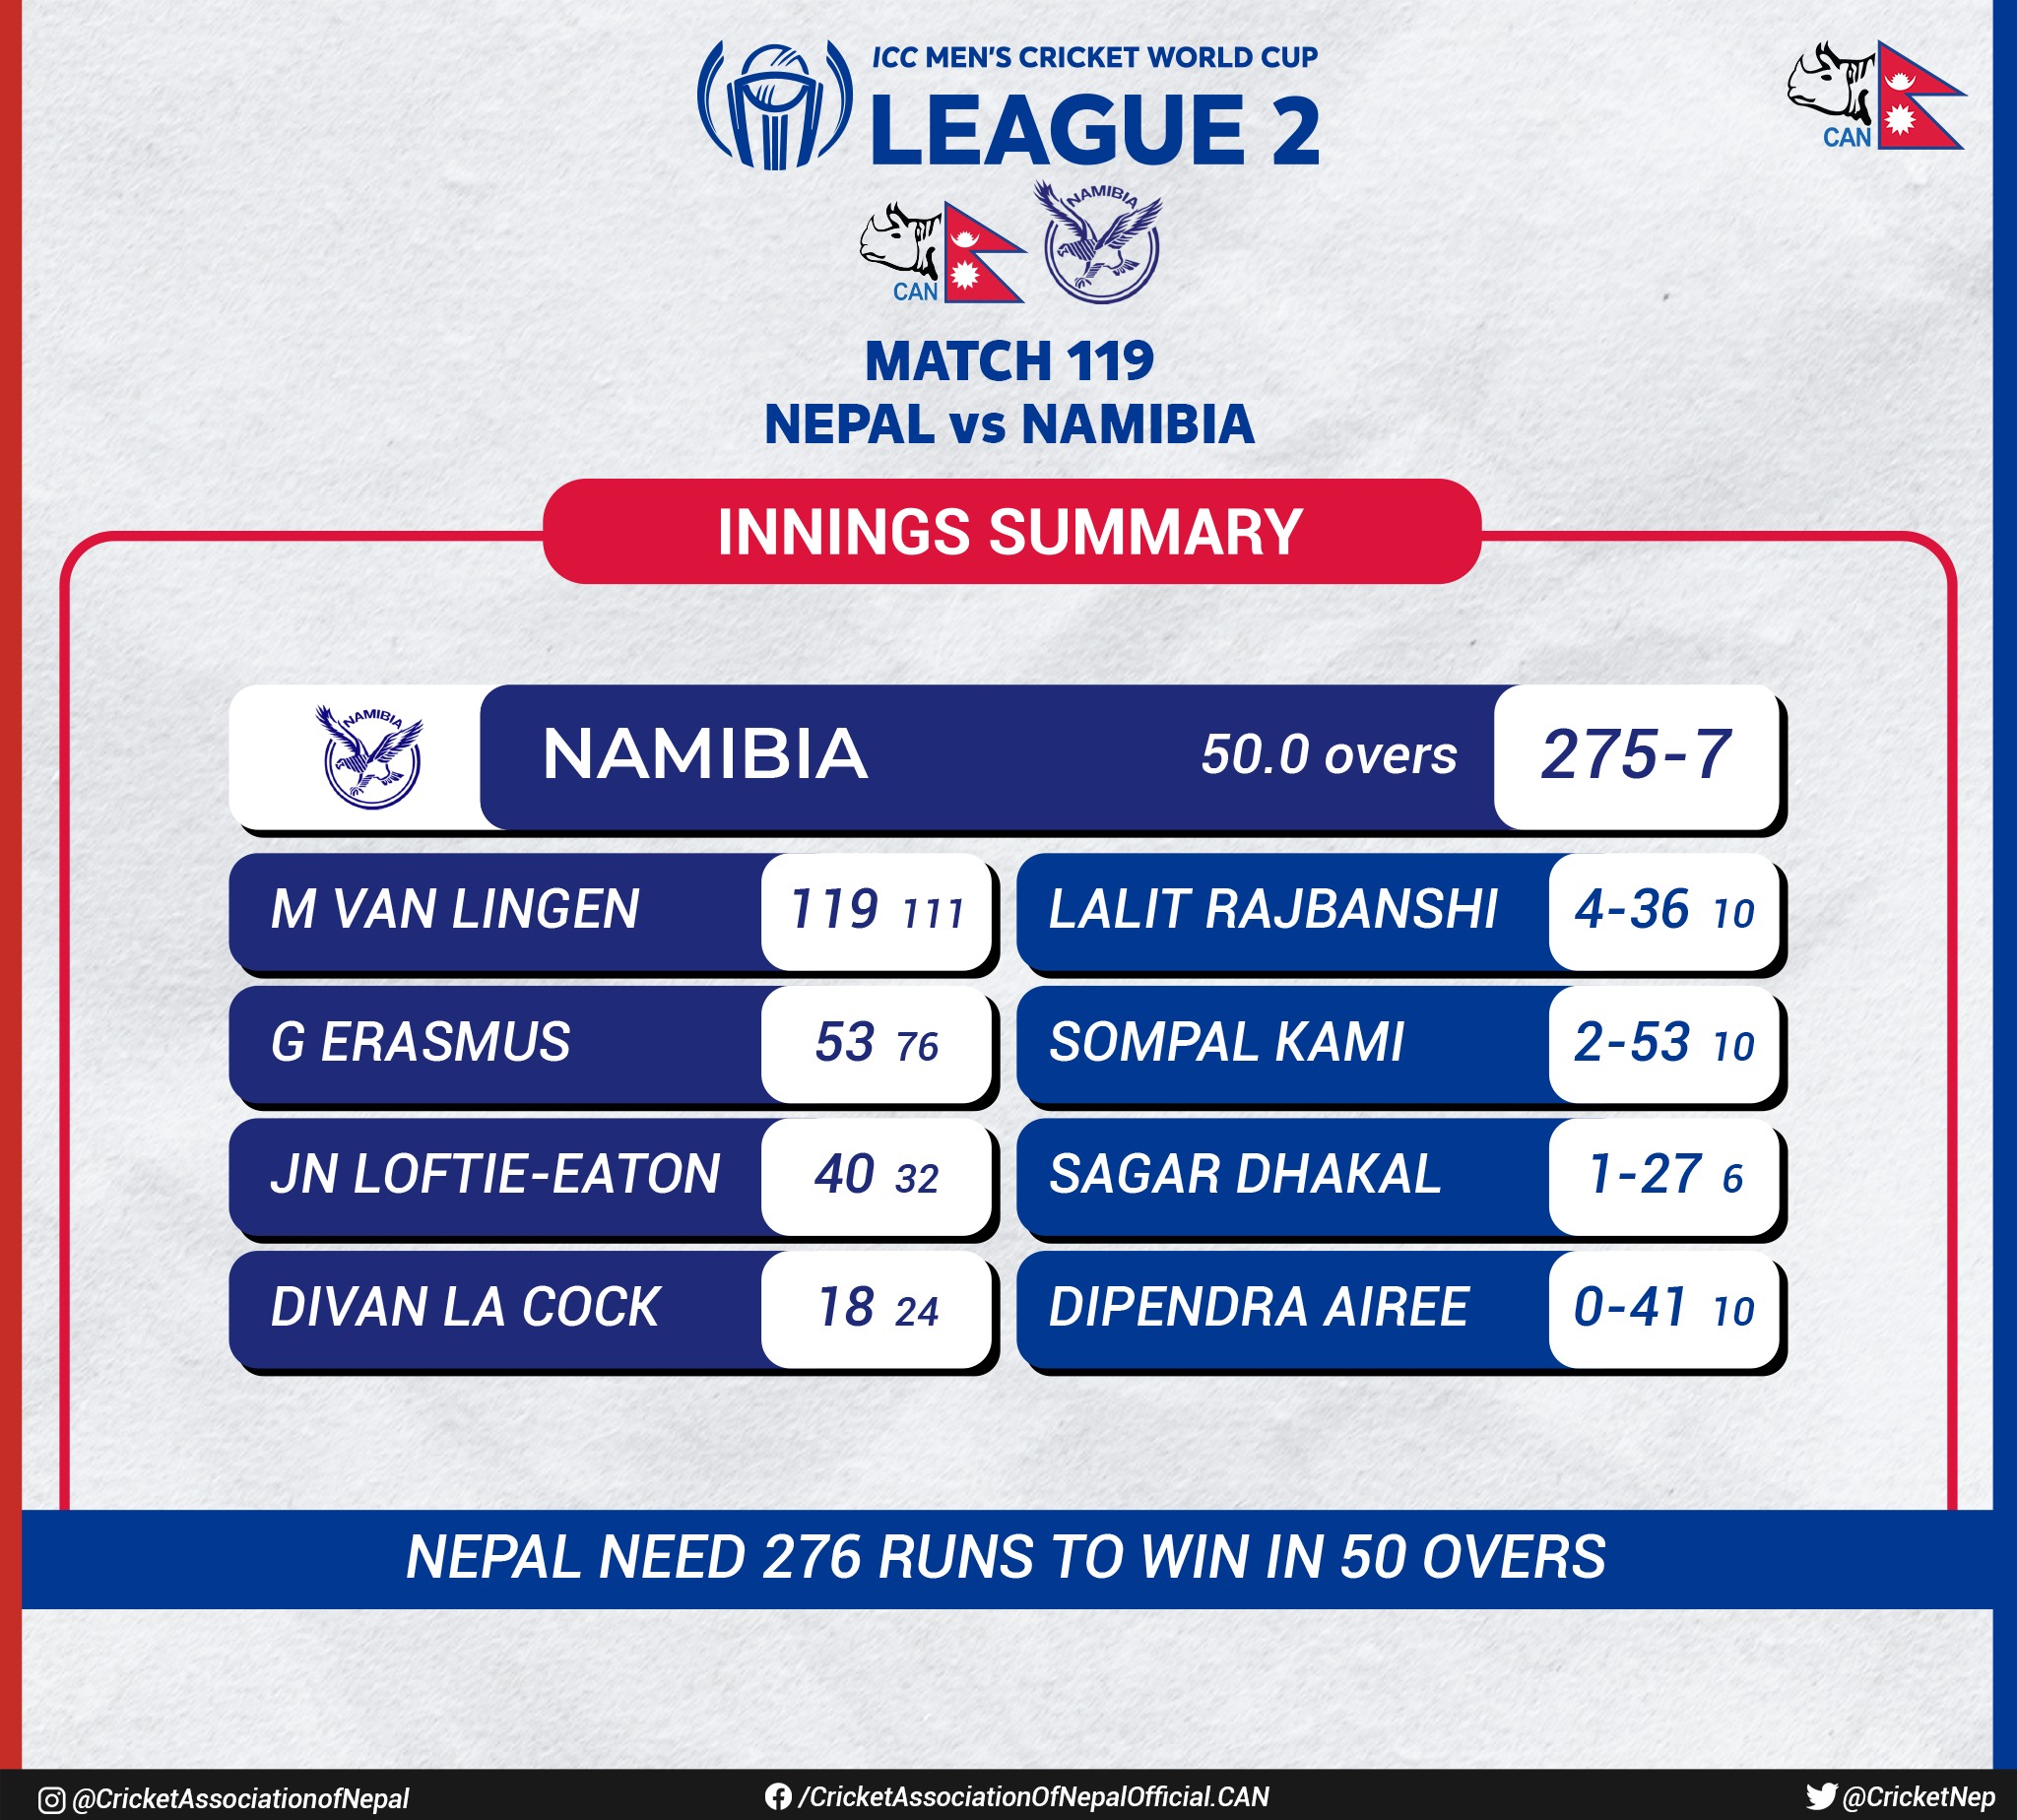 Nepal gets 276 run target from Namibia